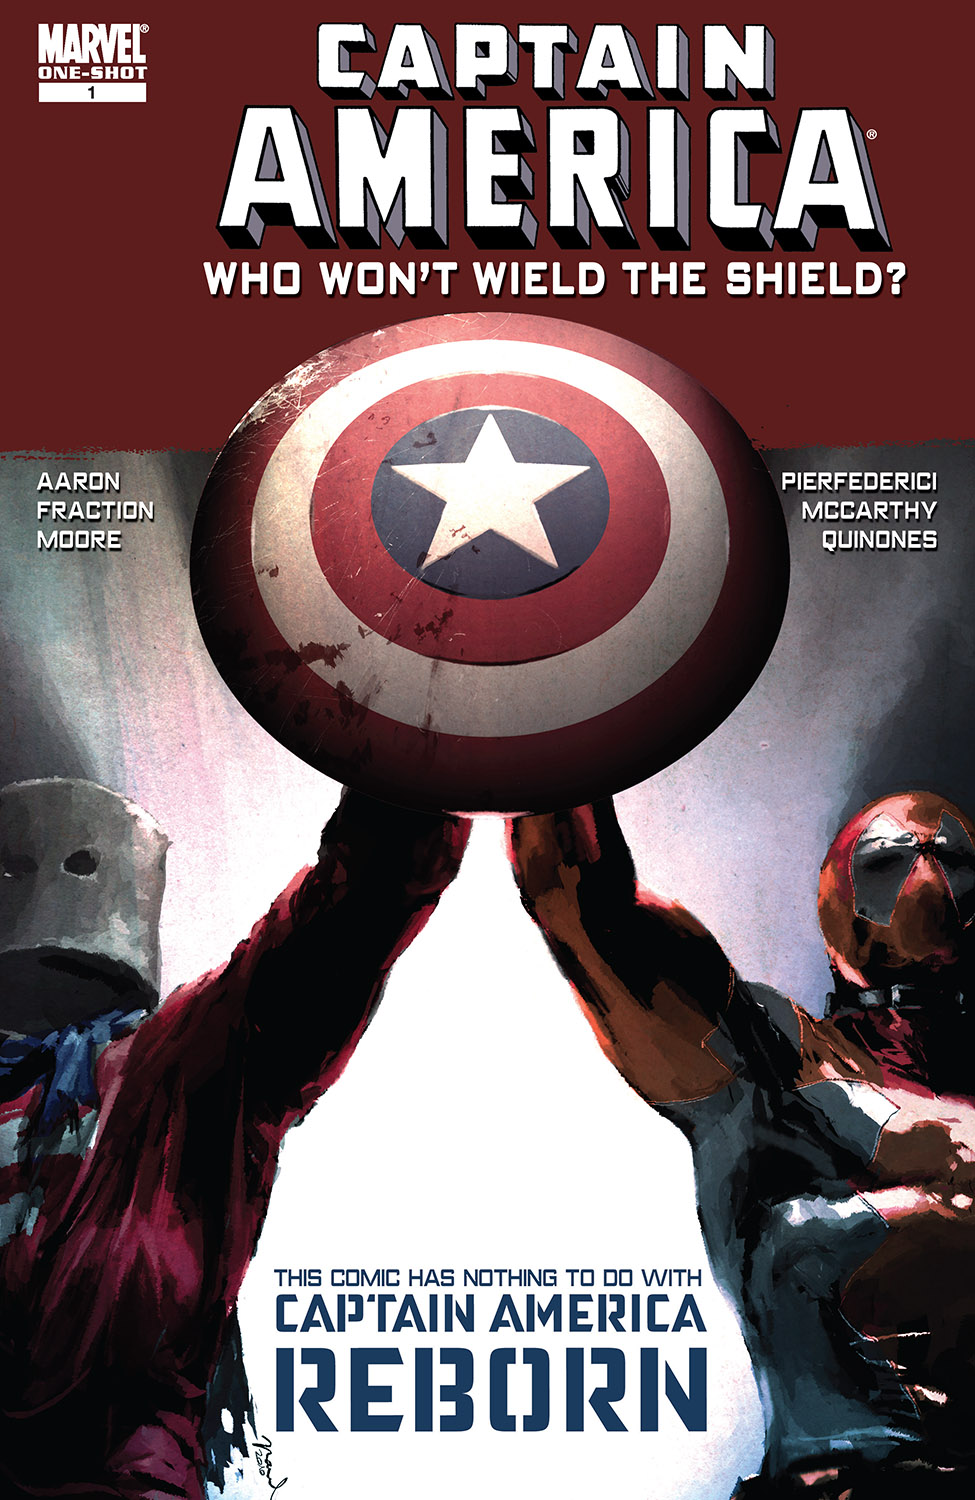 Captain America: Who Won't Wield the Shield (2010) #1